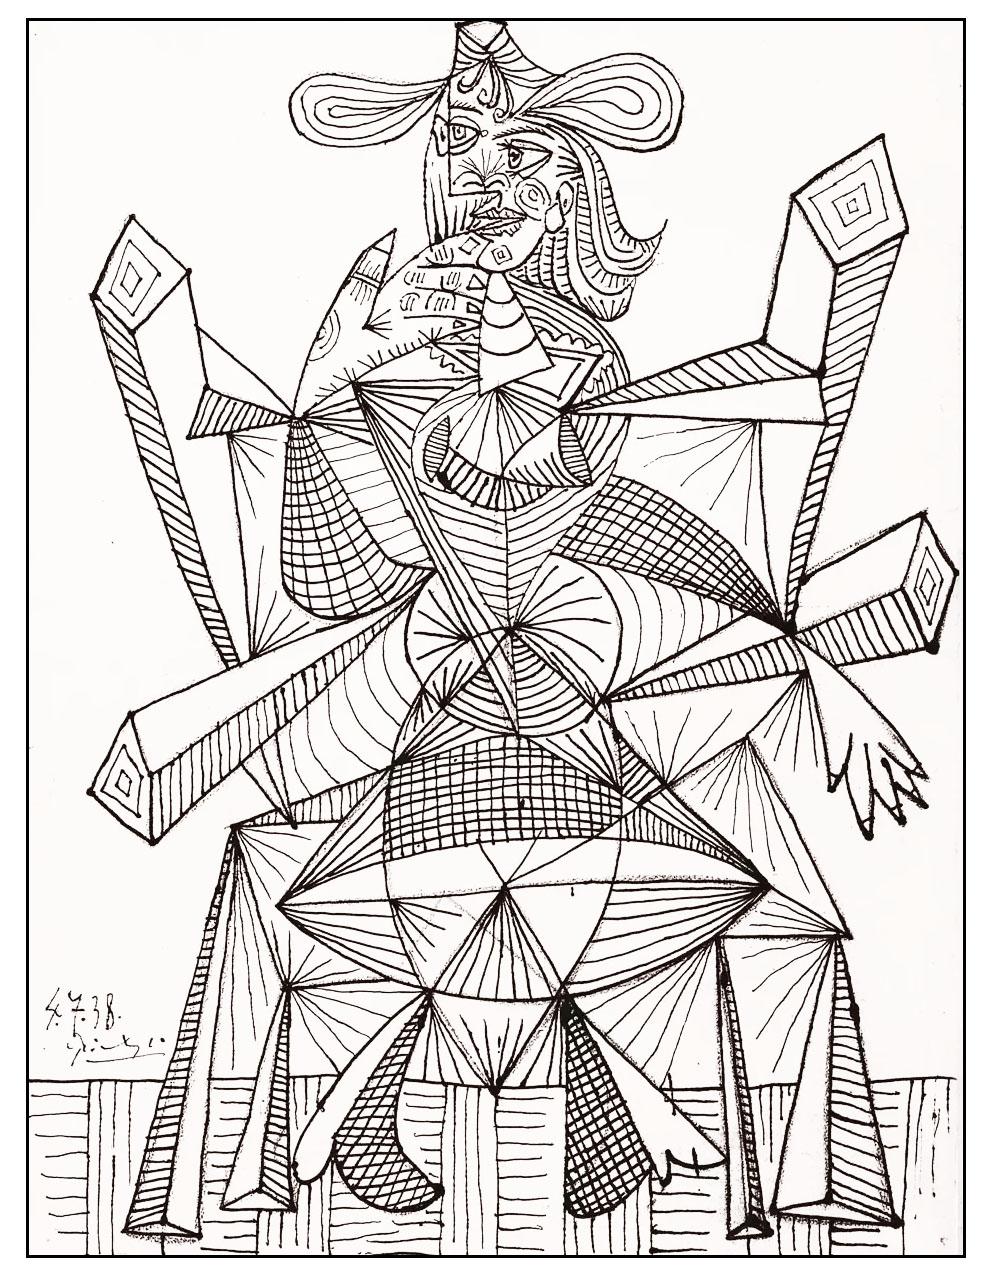 Drawing by picasso 1938 - Masterpieces Adult Coloring Pages - Page 2/